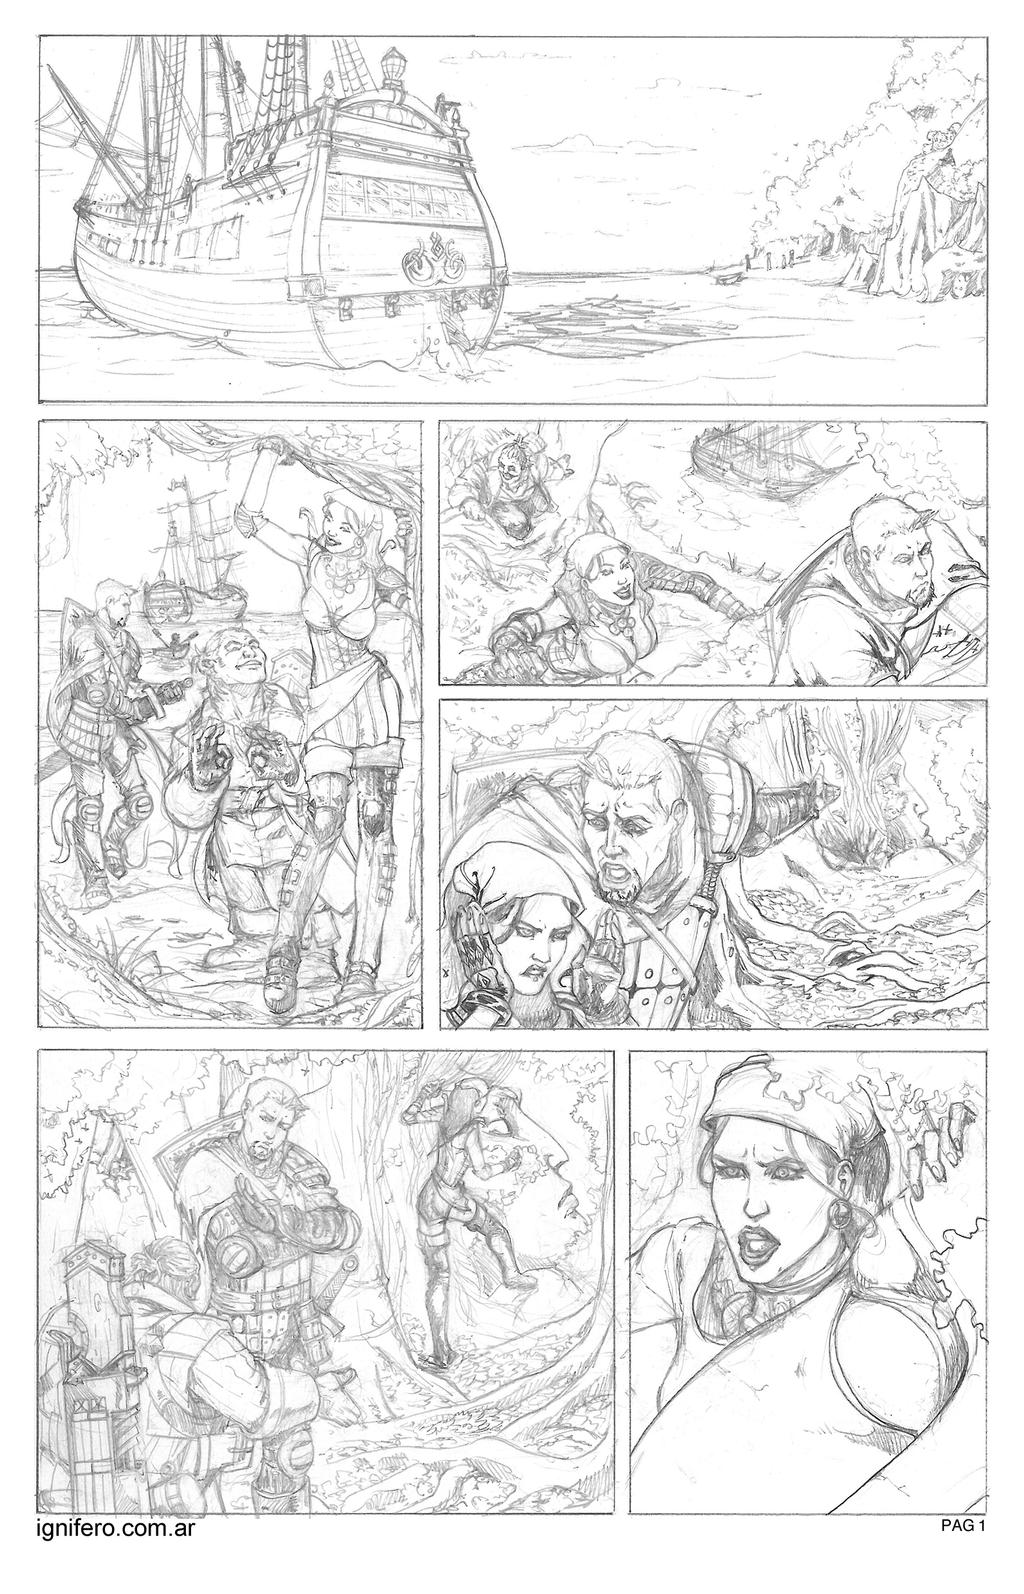 Dragon Age samples page 1/5